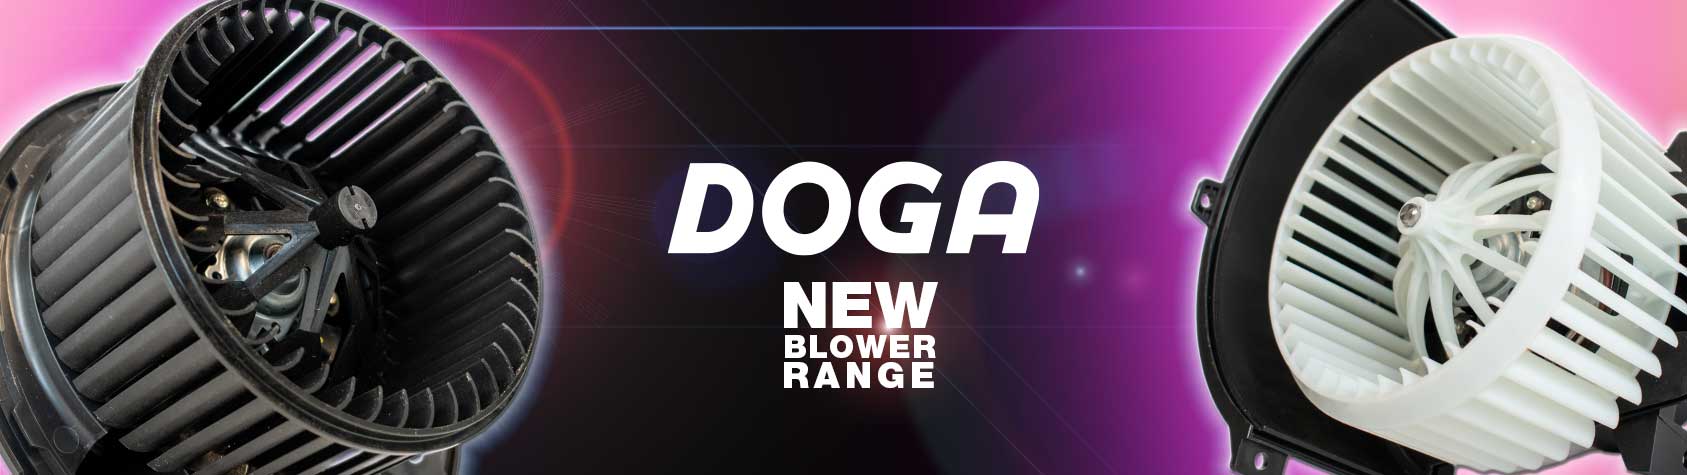 DOGA blowers: Power and performance for optimal climate control.